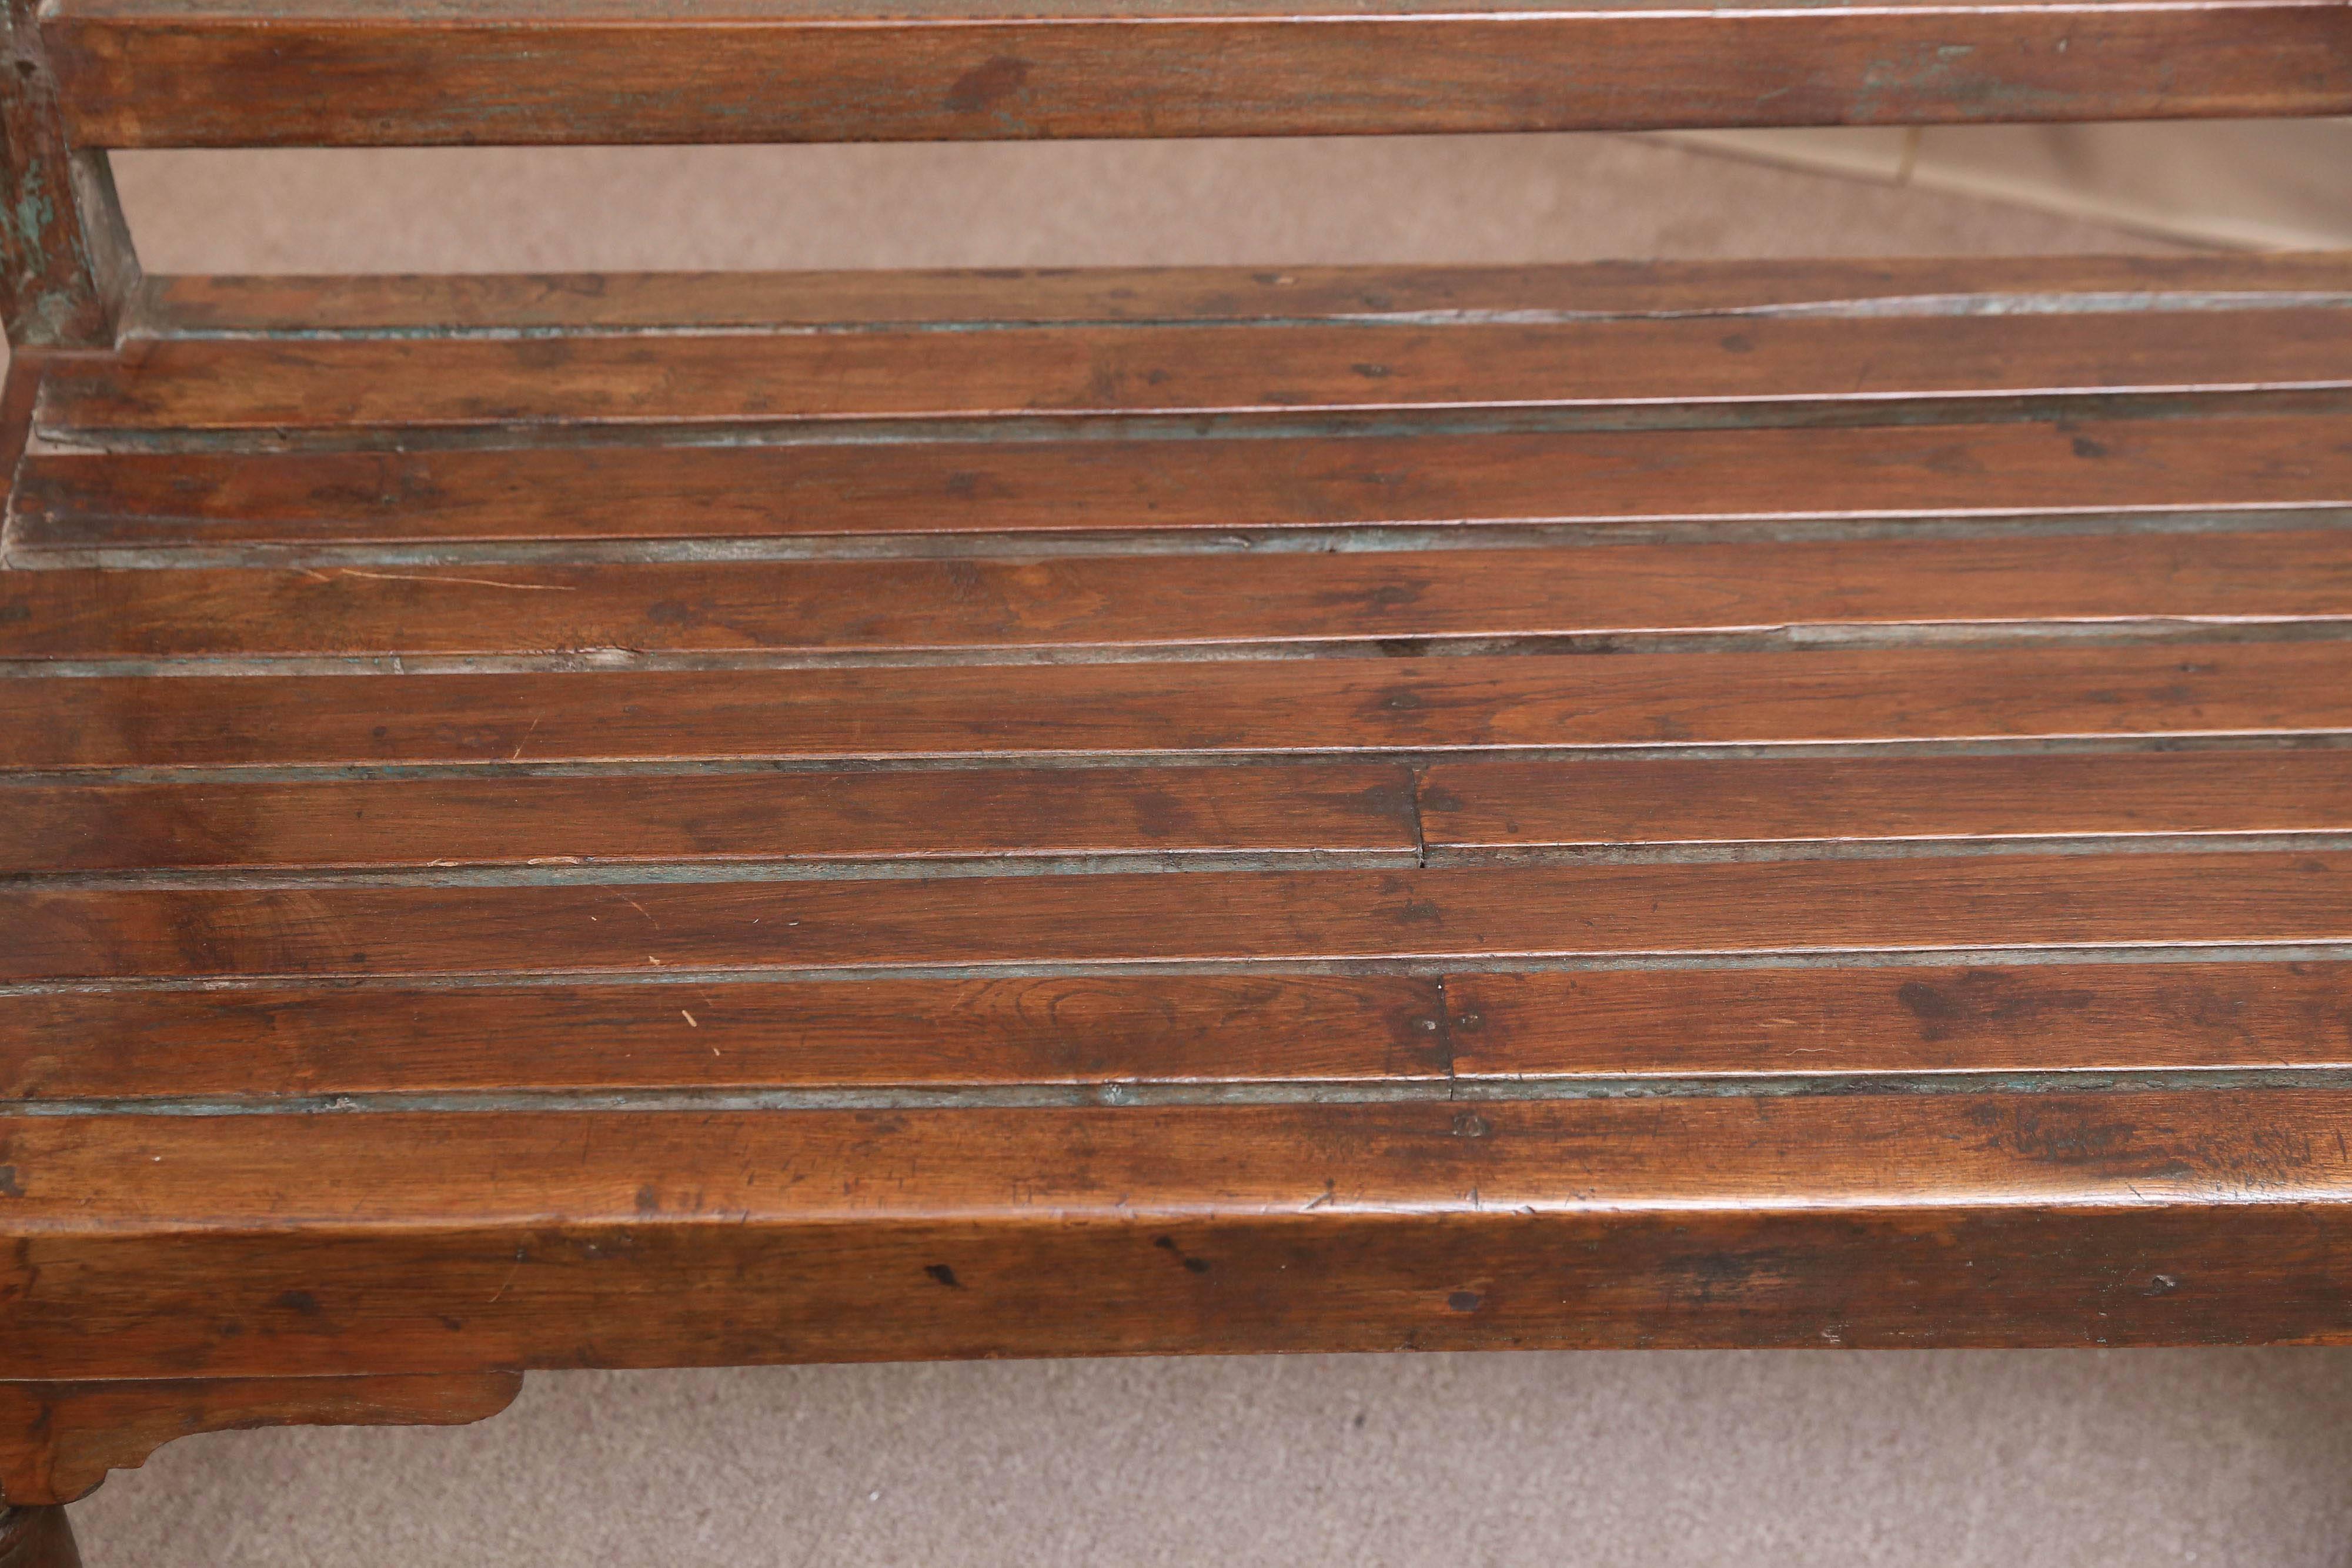 Solid Teak Wood Mid-19th Century British Colonial Work Bench 1